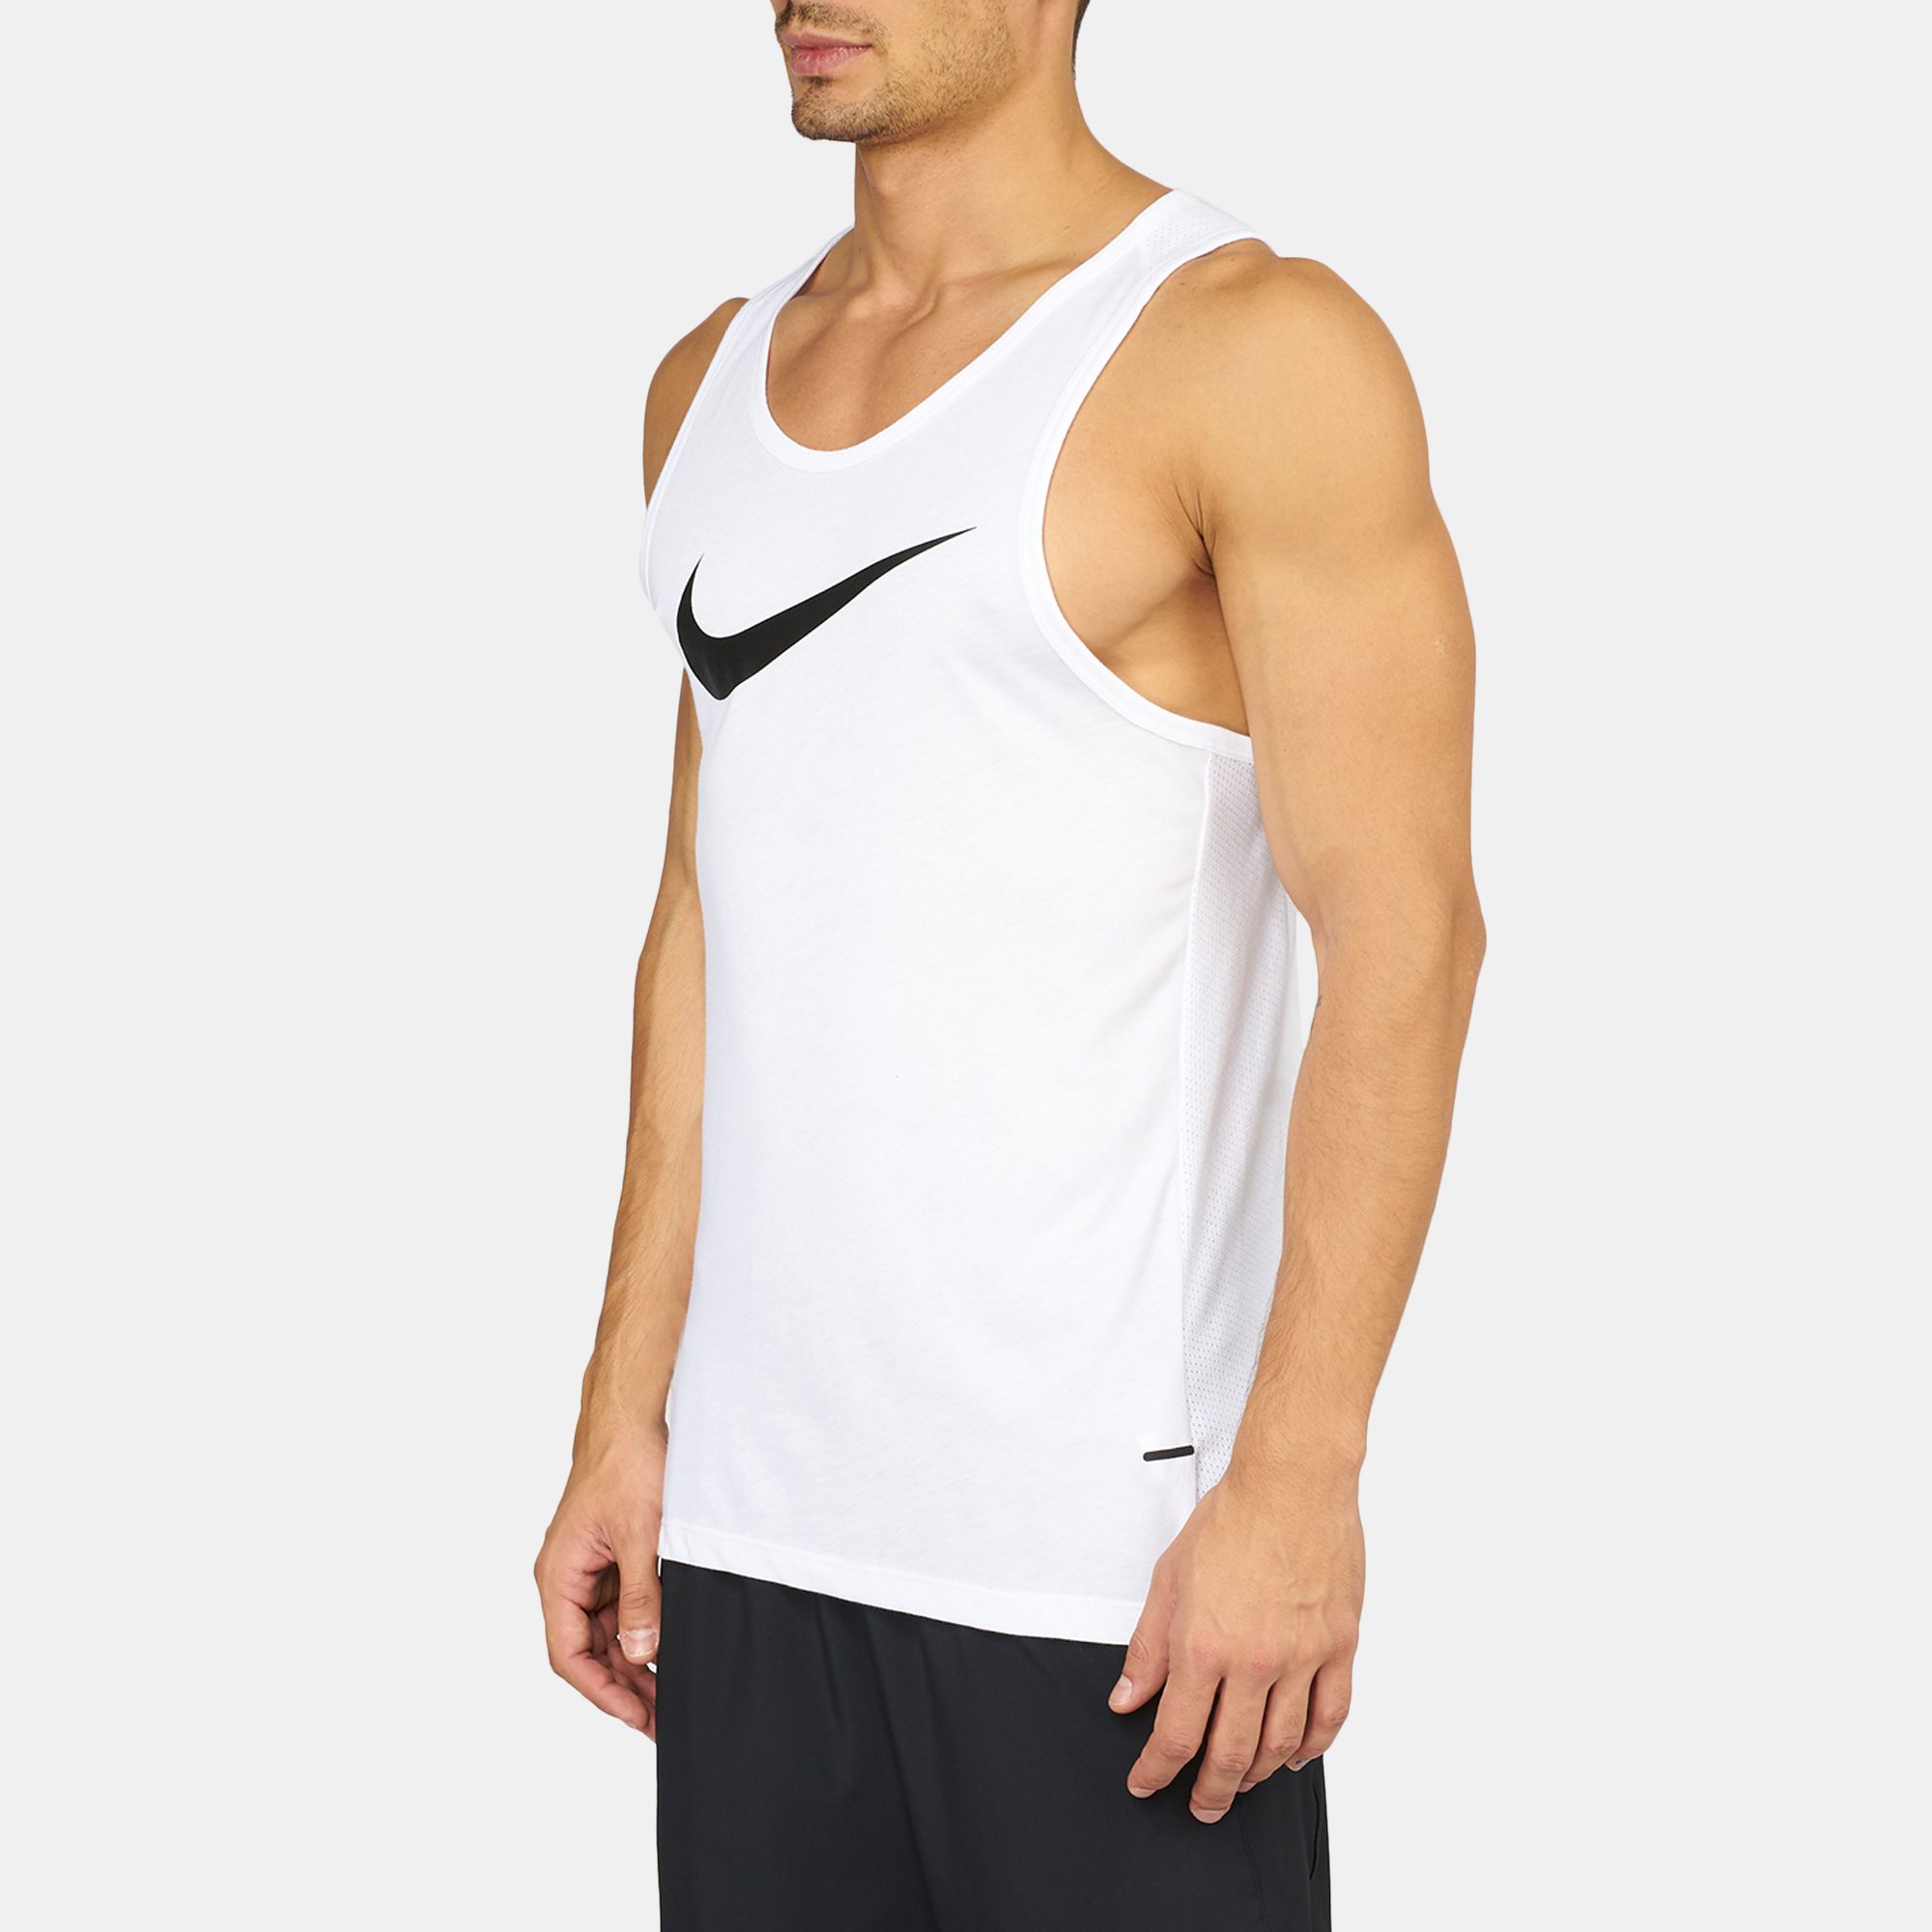 Shop White Nike Dry Elite Basketball Tank Top for Mens by Nike | SSS